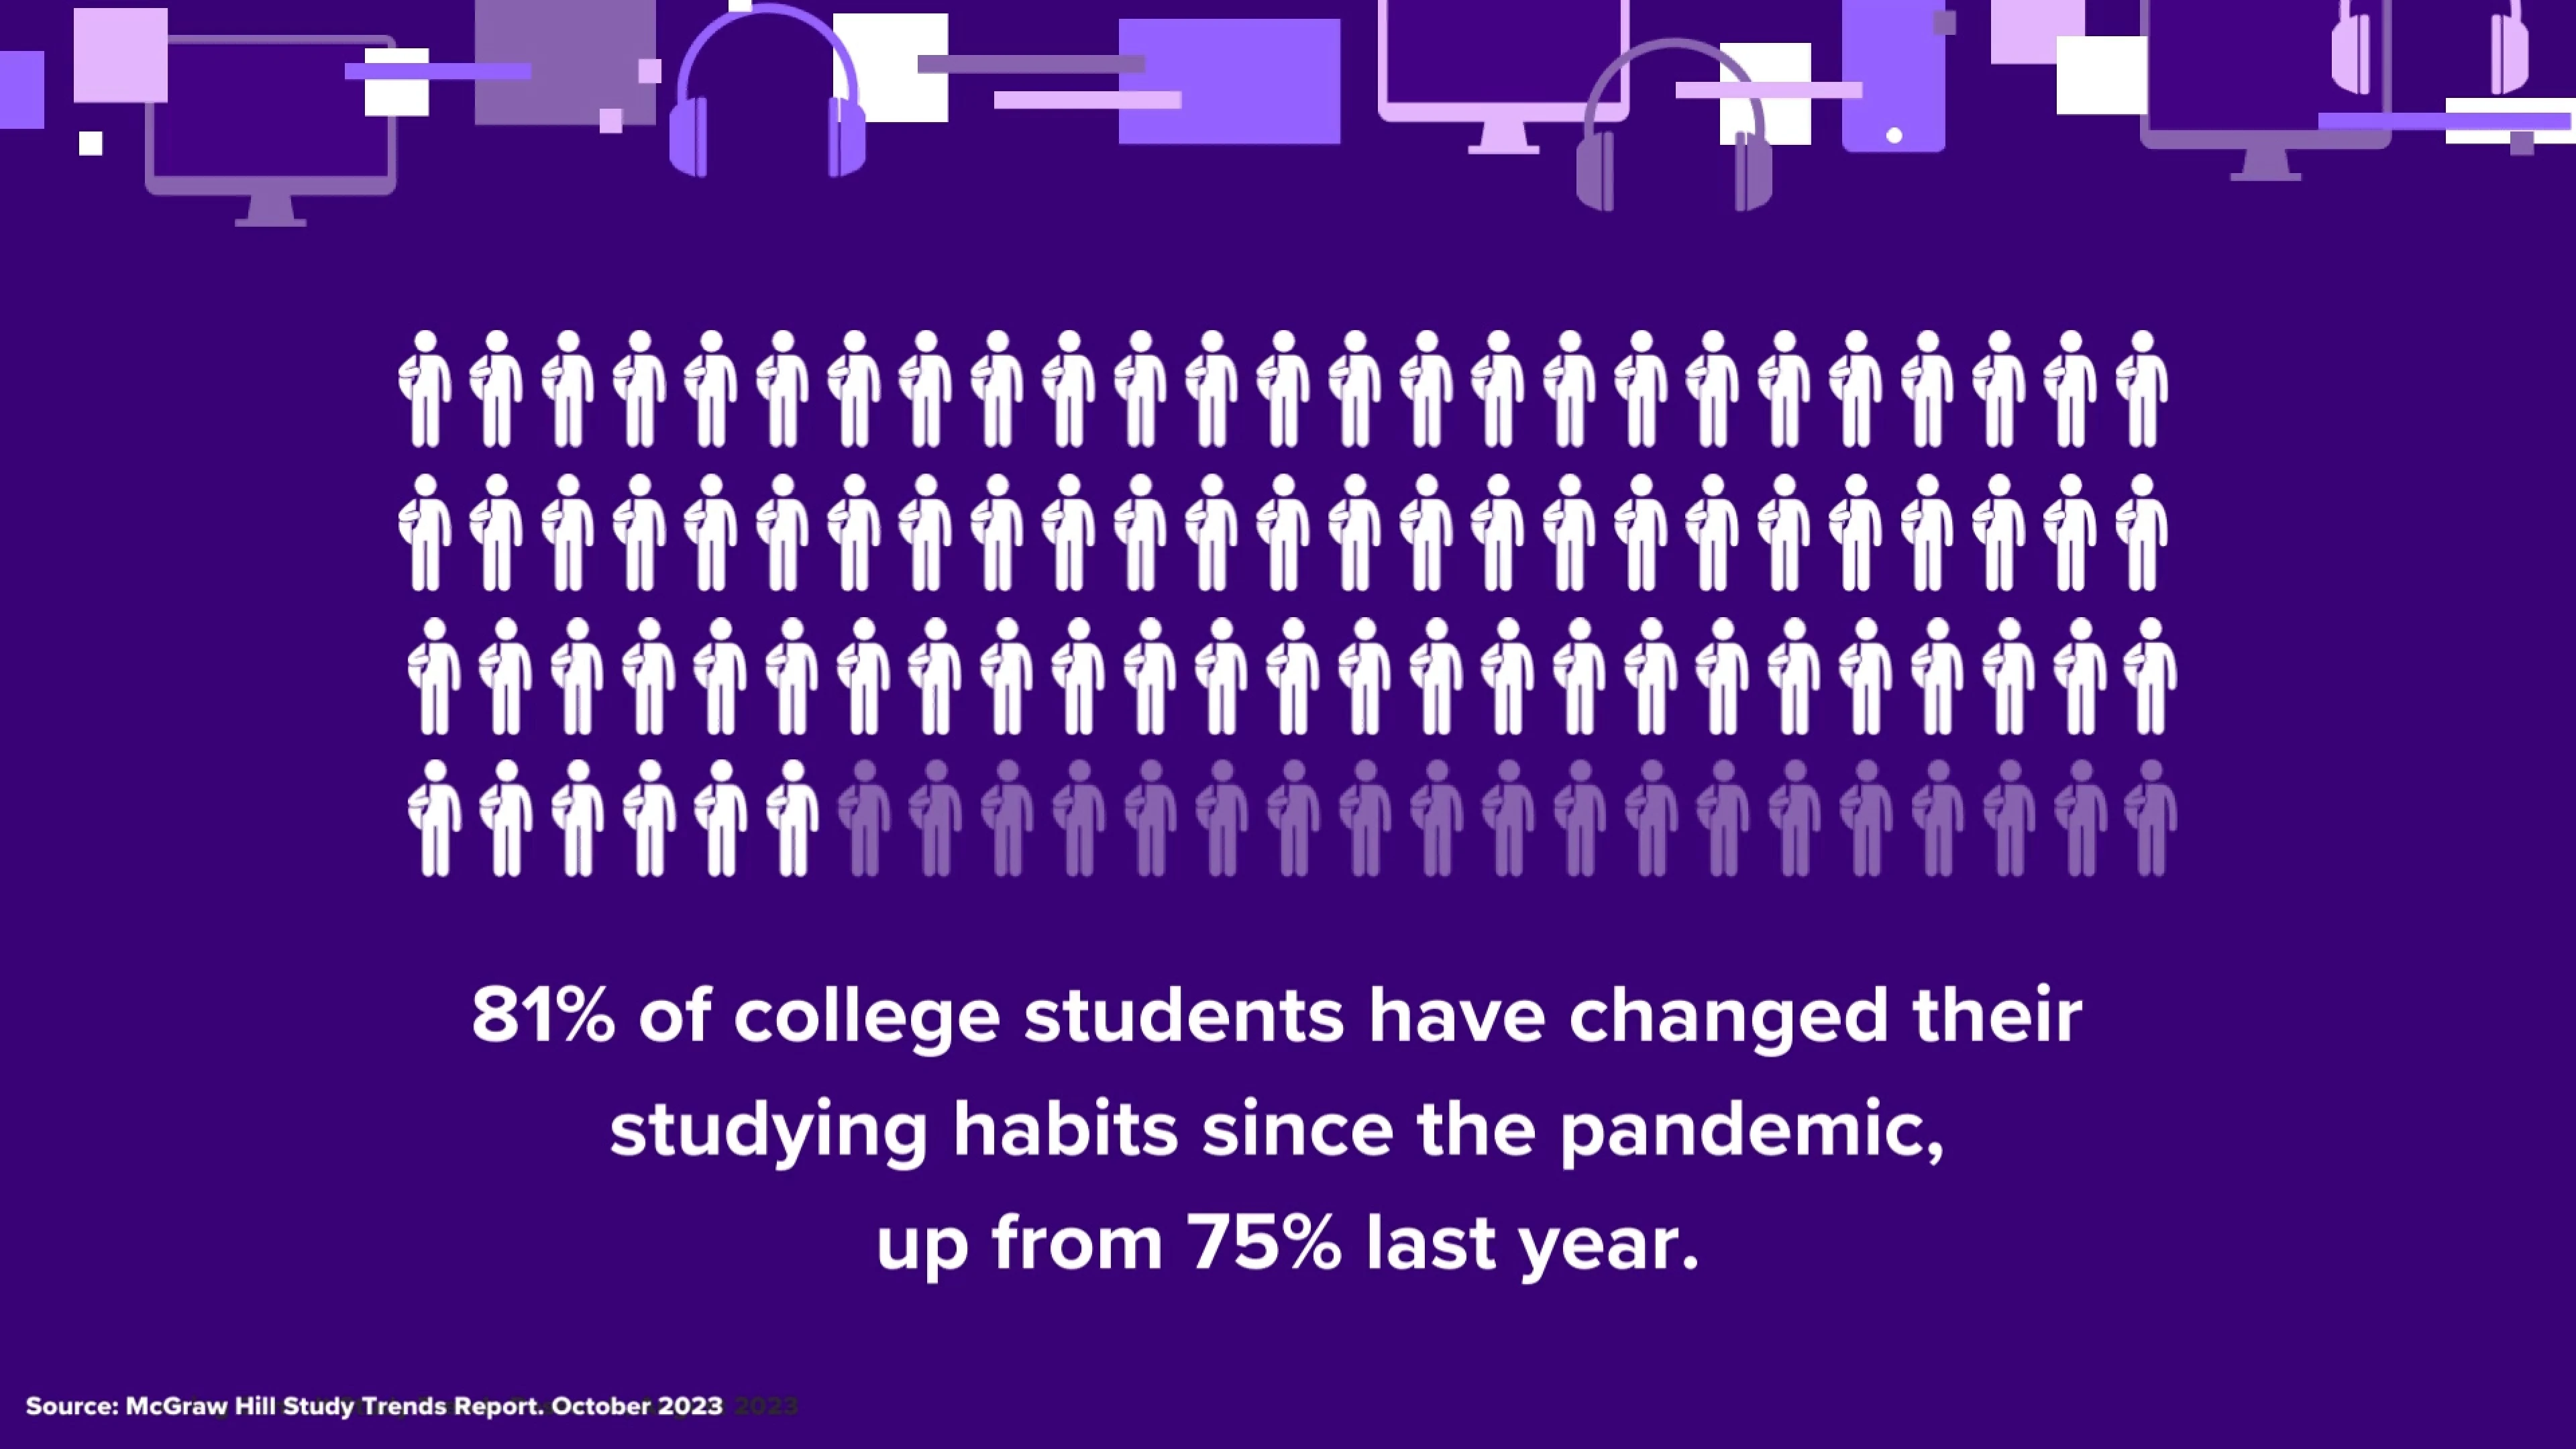 81% of college students have changed their studying habits since the pandemic , up from 75% last year